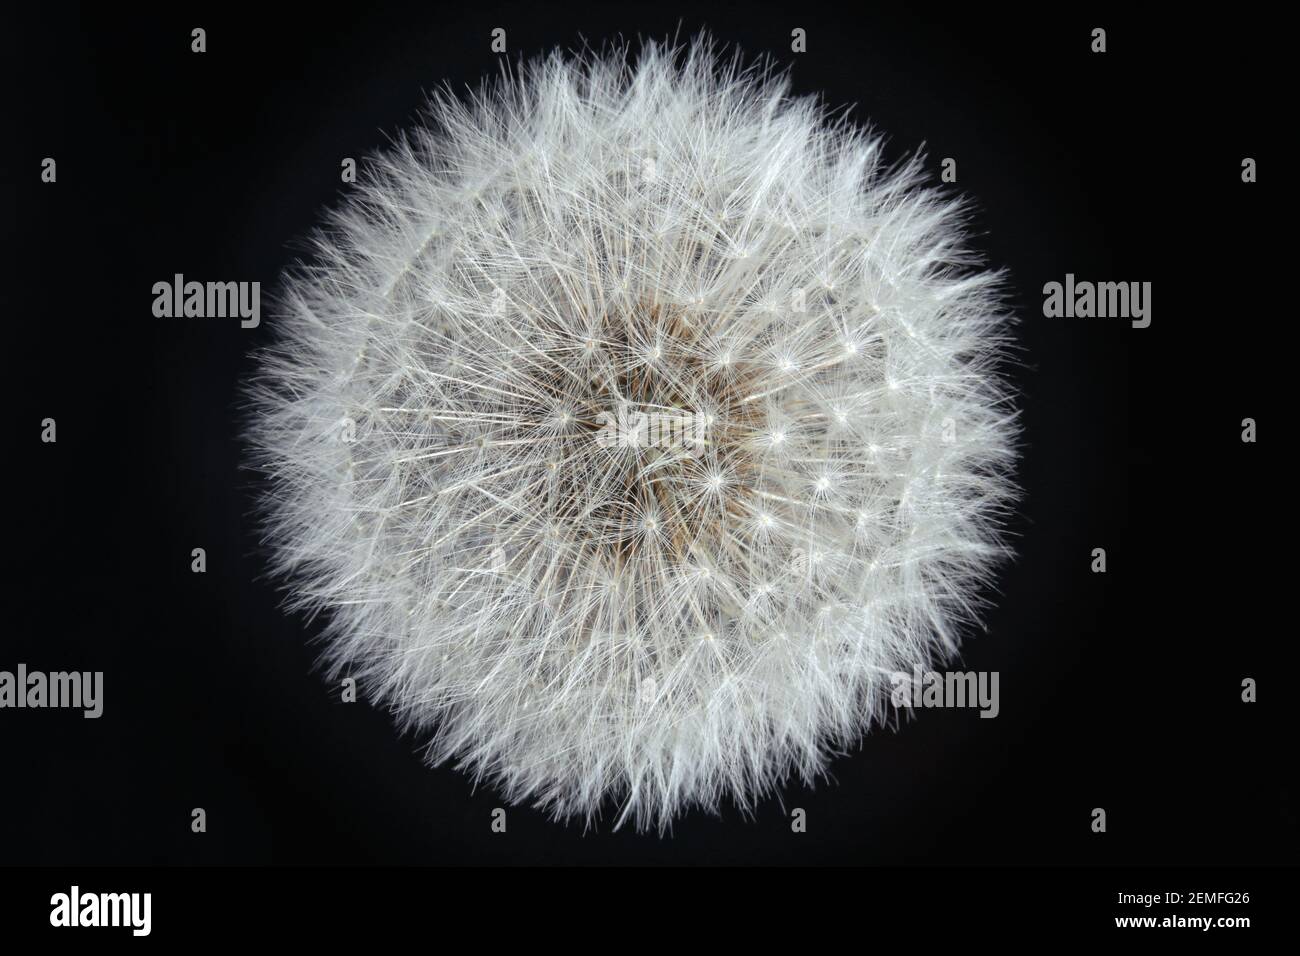 Close up Intact Dandelion (taraxacum officinale) white seed head in front of black background; isolated color studio photo. Stock Photo